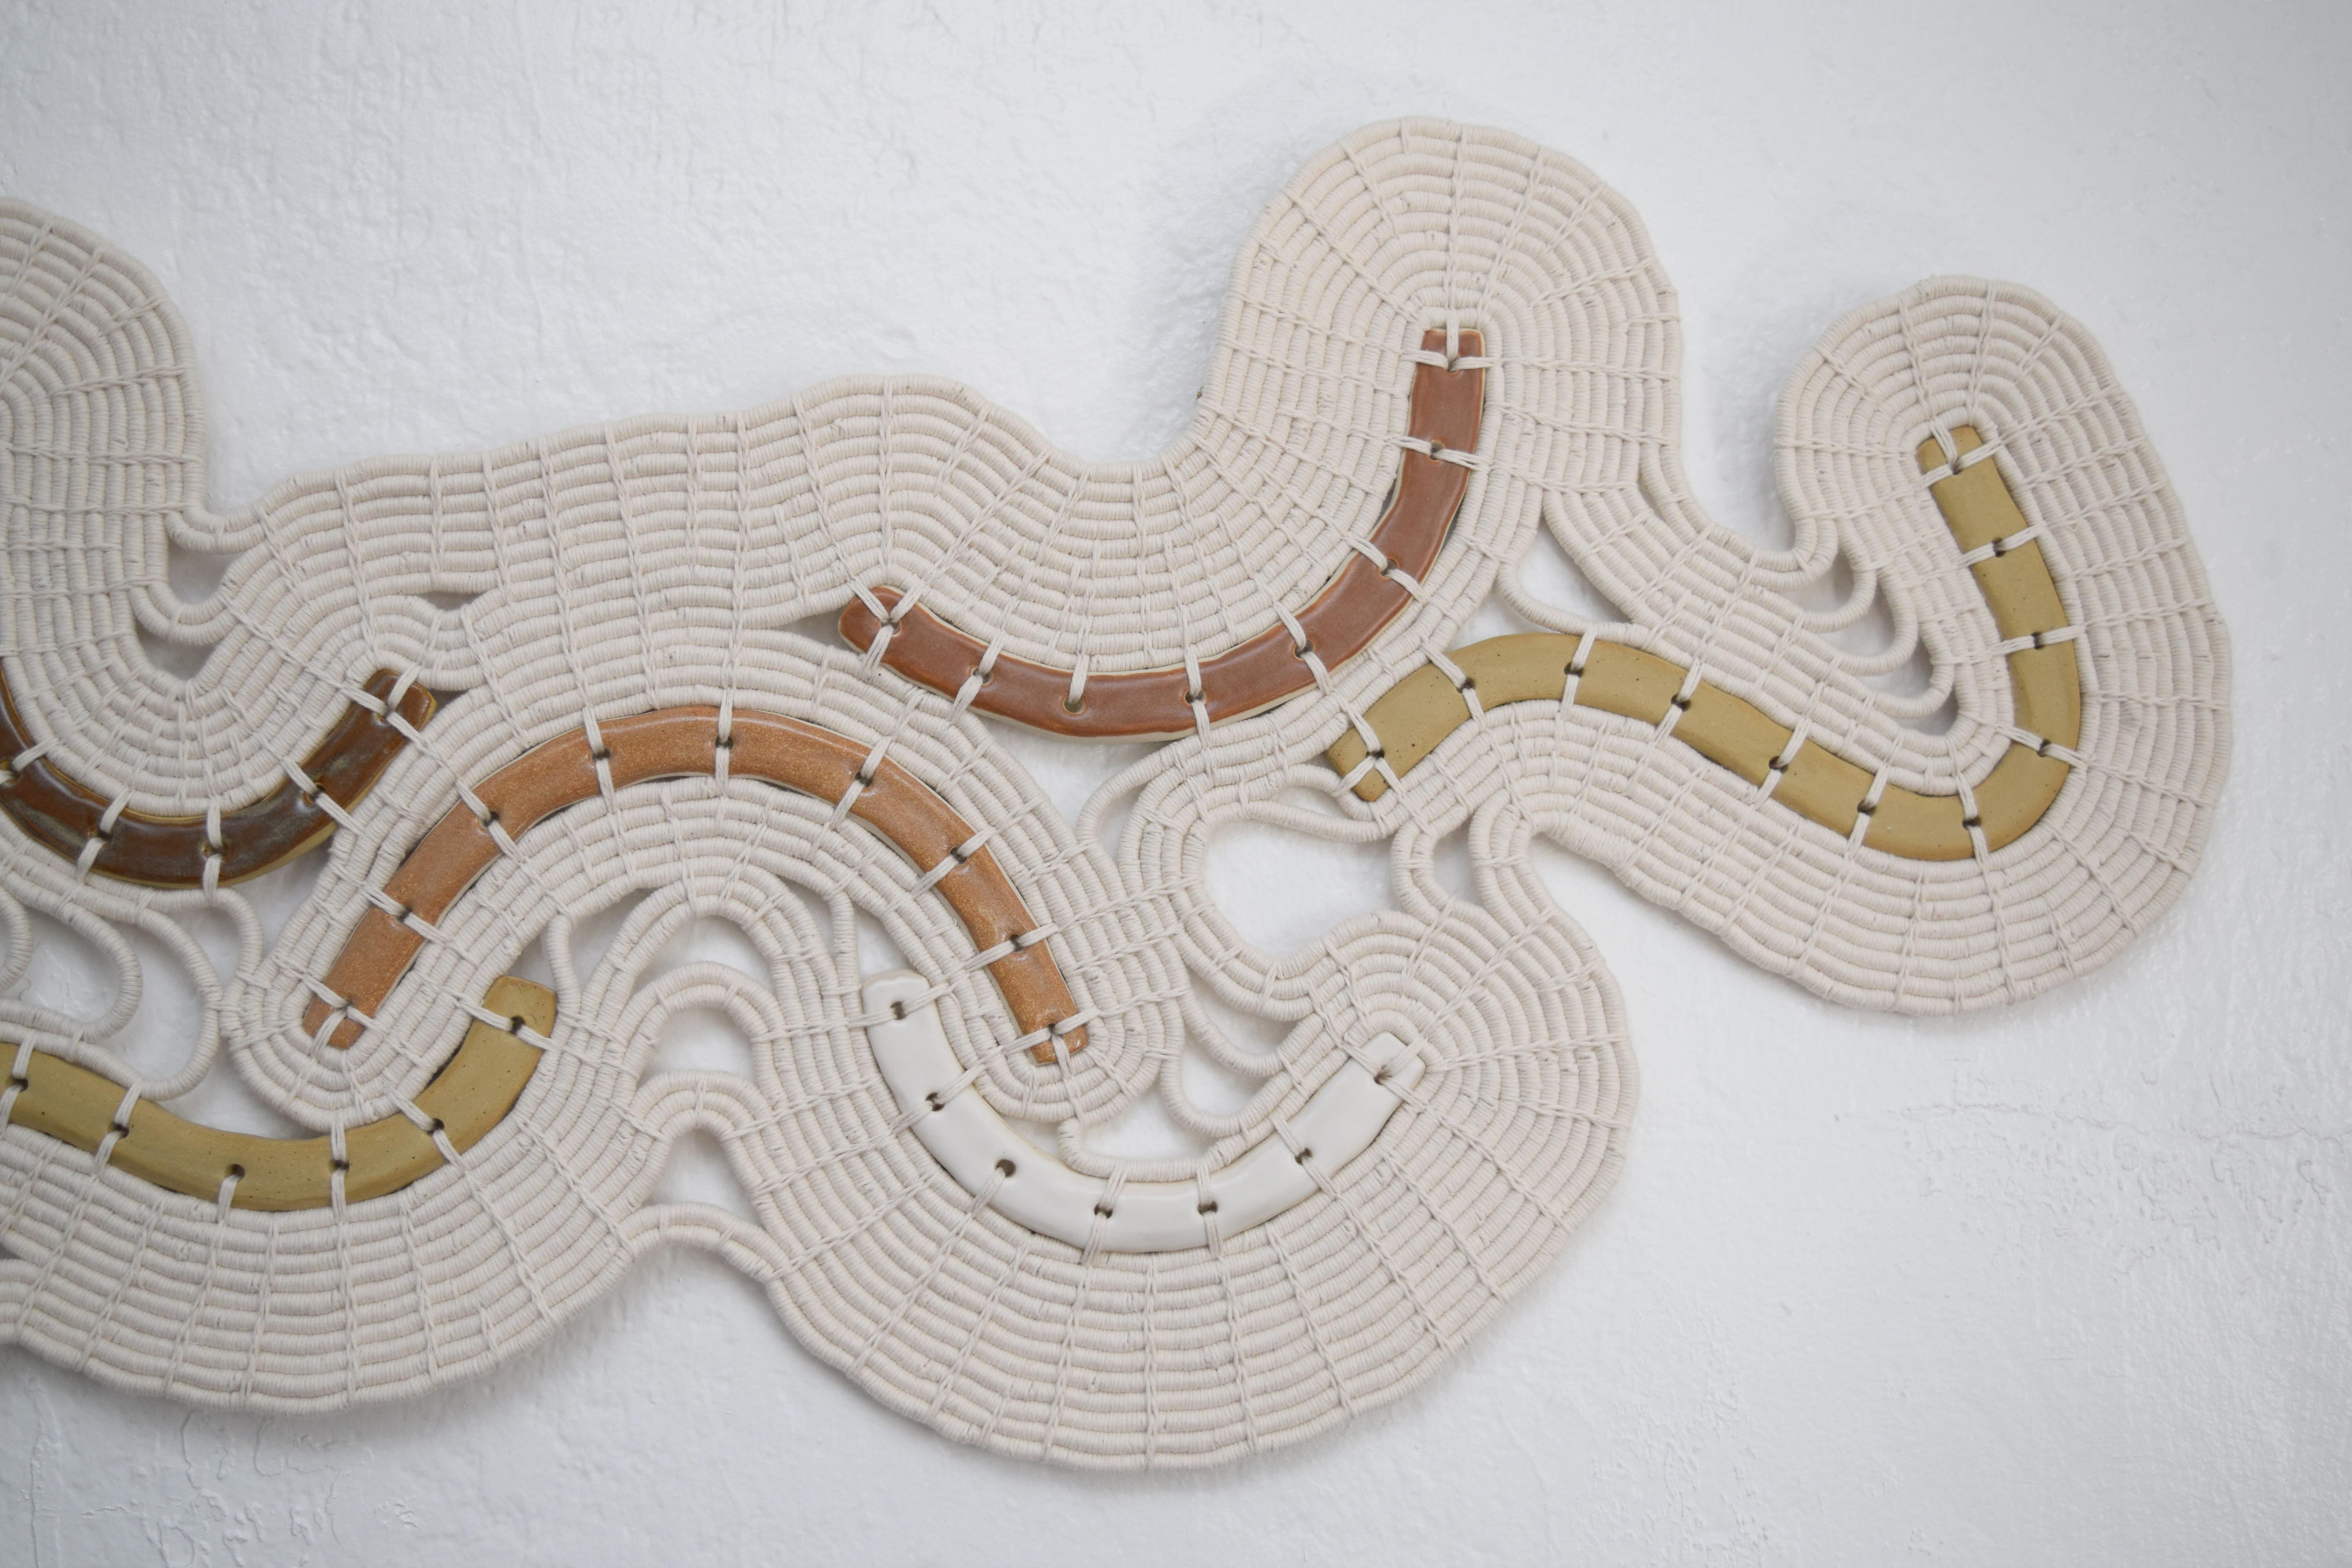 Organic Modern Large Scale Ceramic & Fiber Wall Sculpture #716, Hand Formed Clay & Woven Cotton For Sale